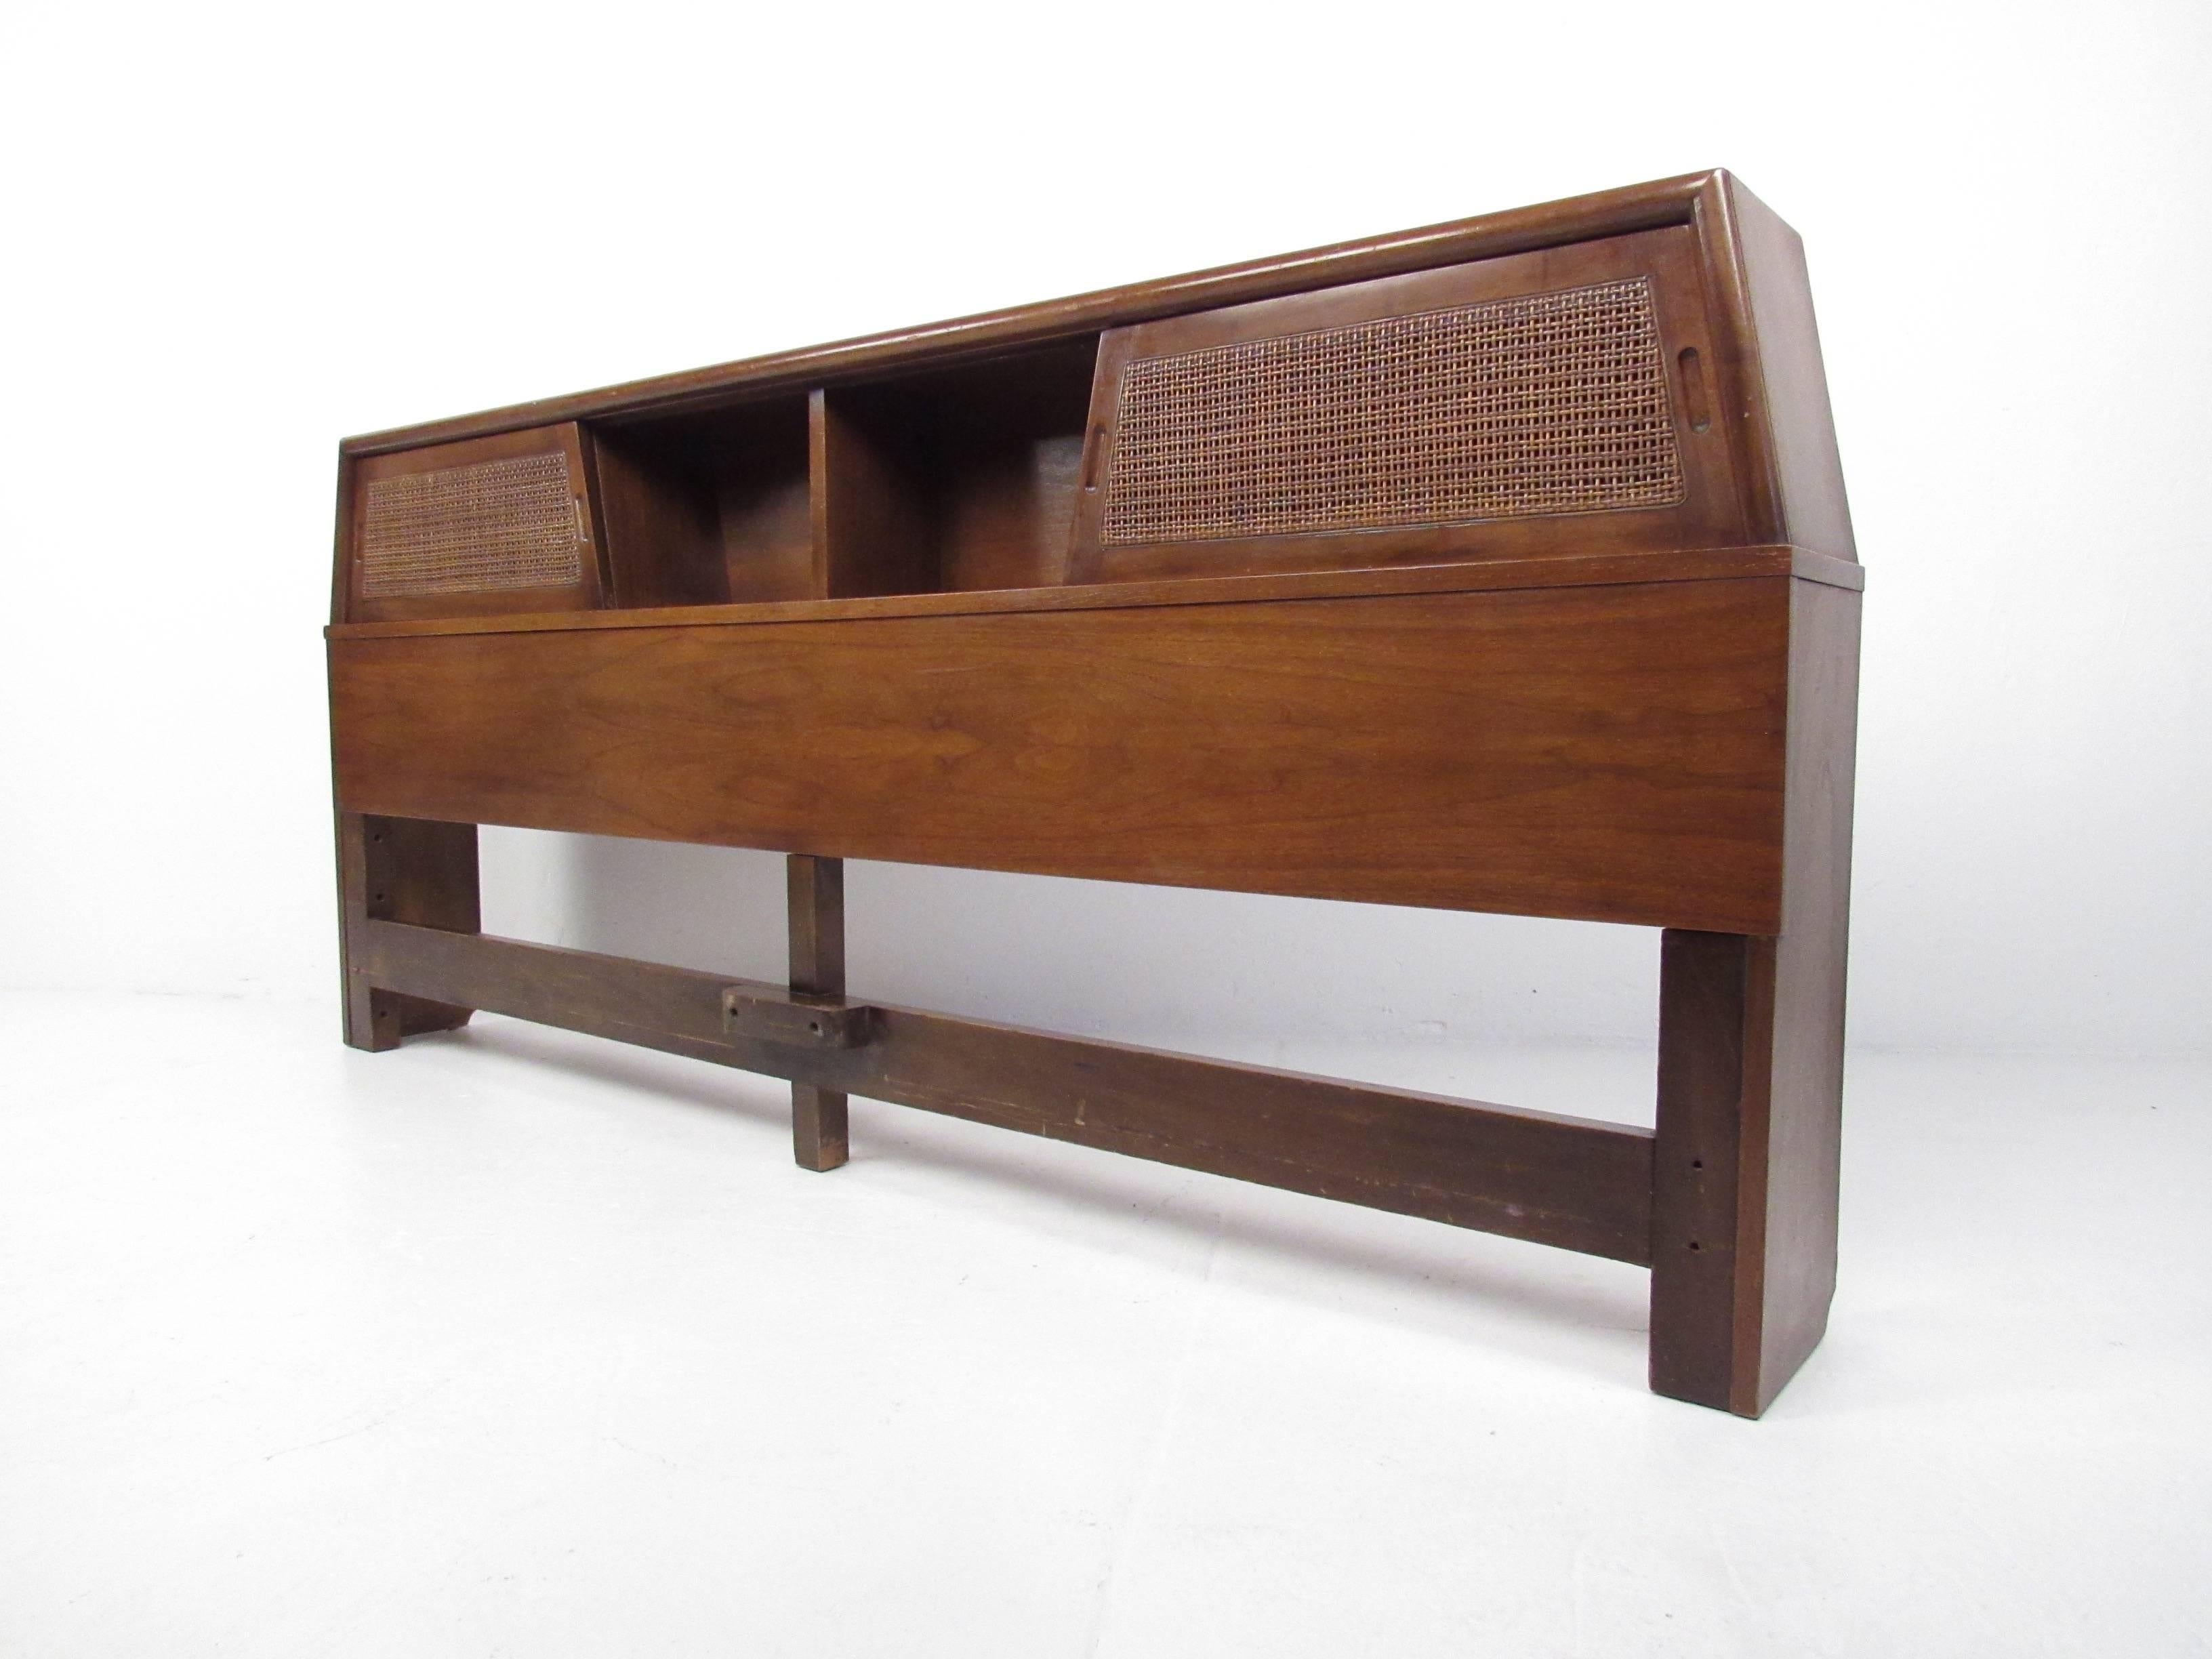 This vintage modern king-size headboard features sliding cane front cabinet doors offering concealed storage in a stylish package. Beautiful walnut finish adds to this well constructed Mid-Century headboard. Please confirm item location (NY or NJ).